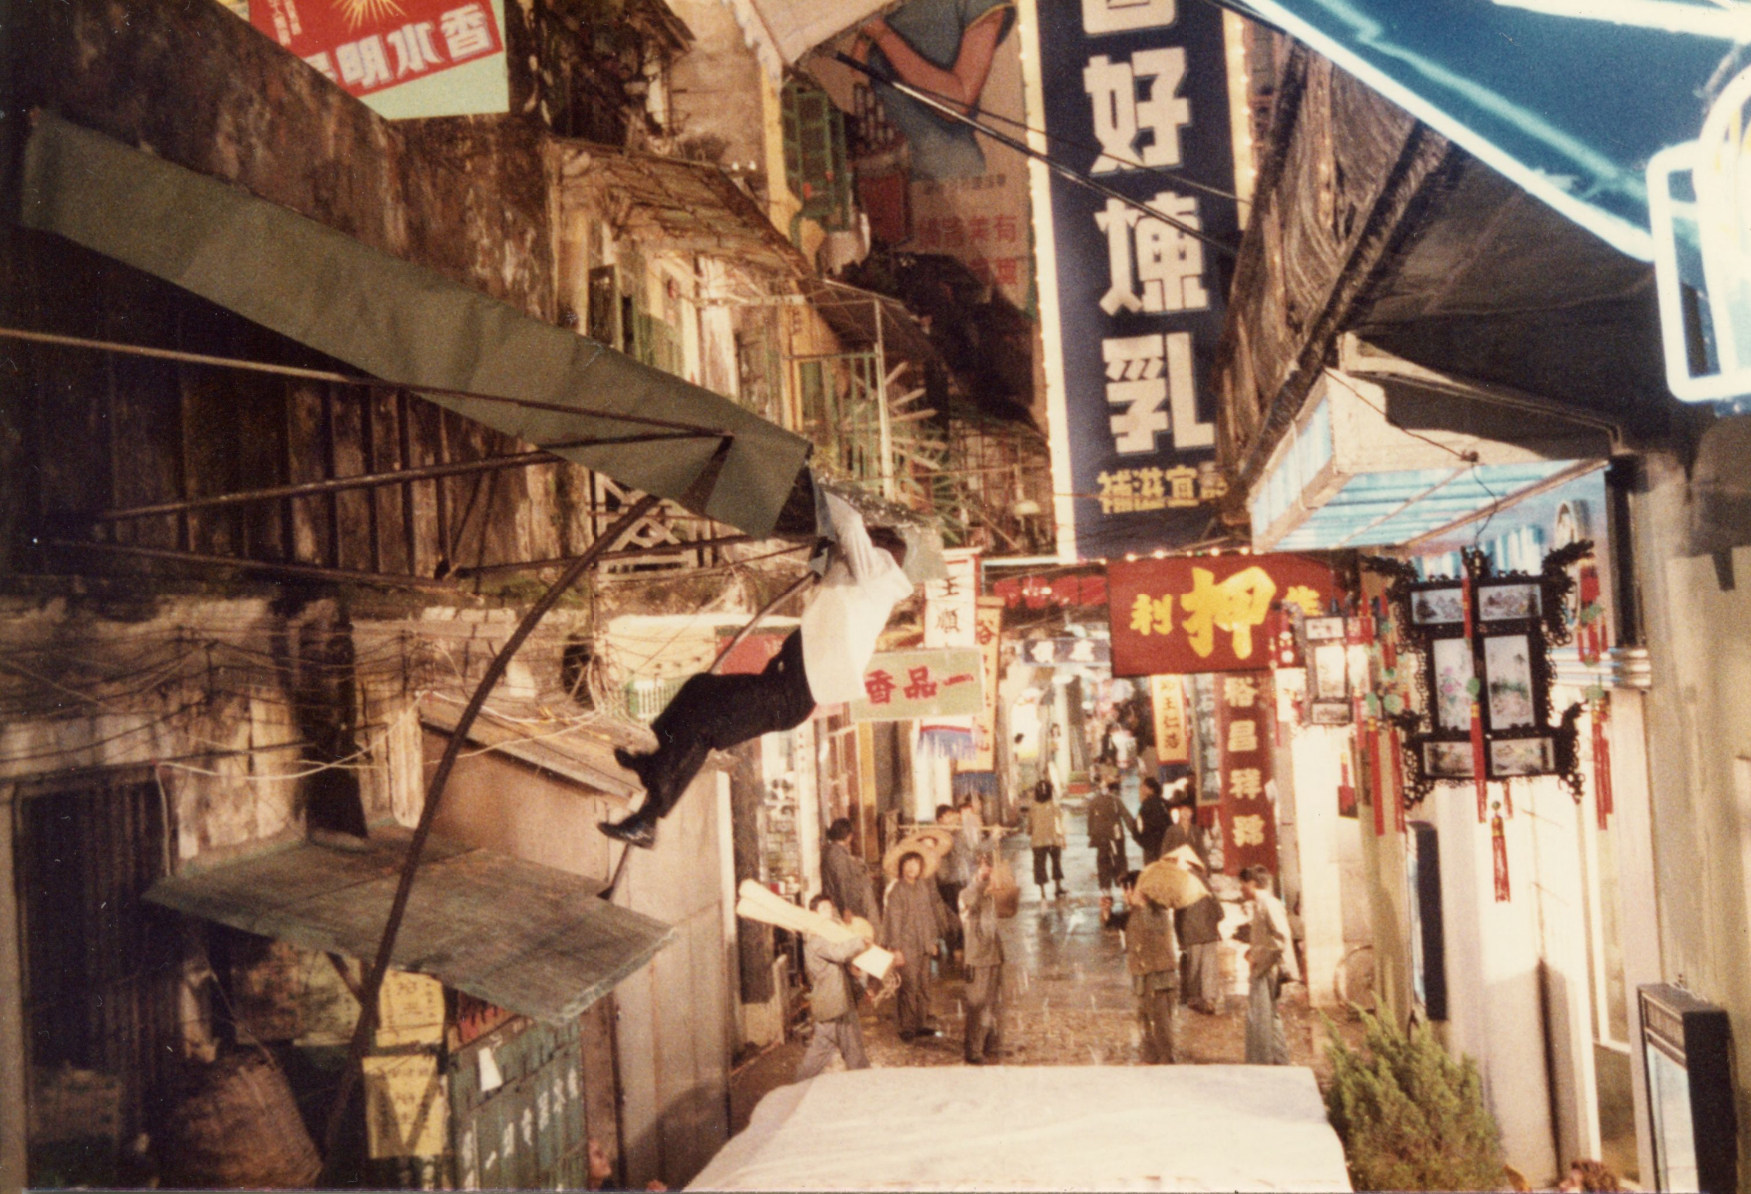 A still P19 from “Indiana Jones and the Temple of Doom” shot in Macau. Photo: Pepperdine University Libraries/Micky Moore Collection